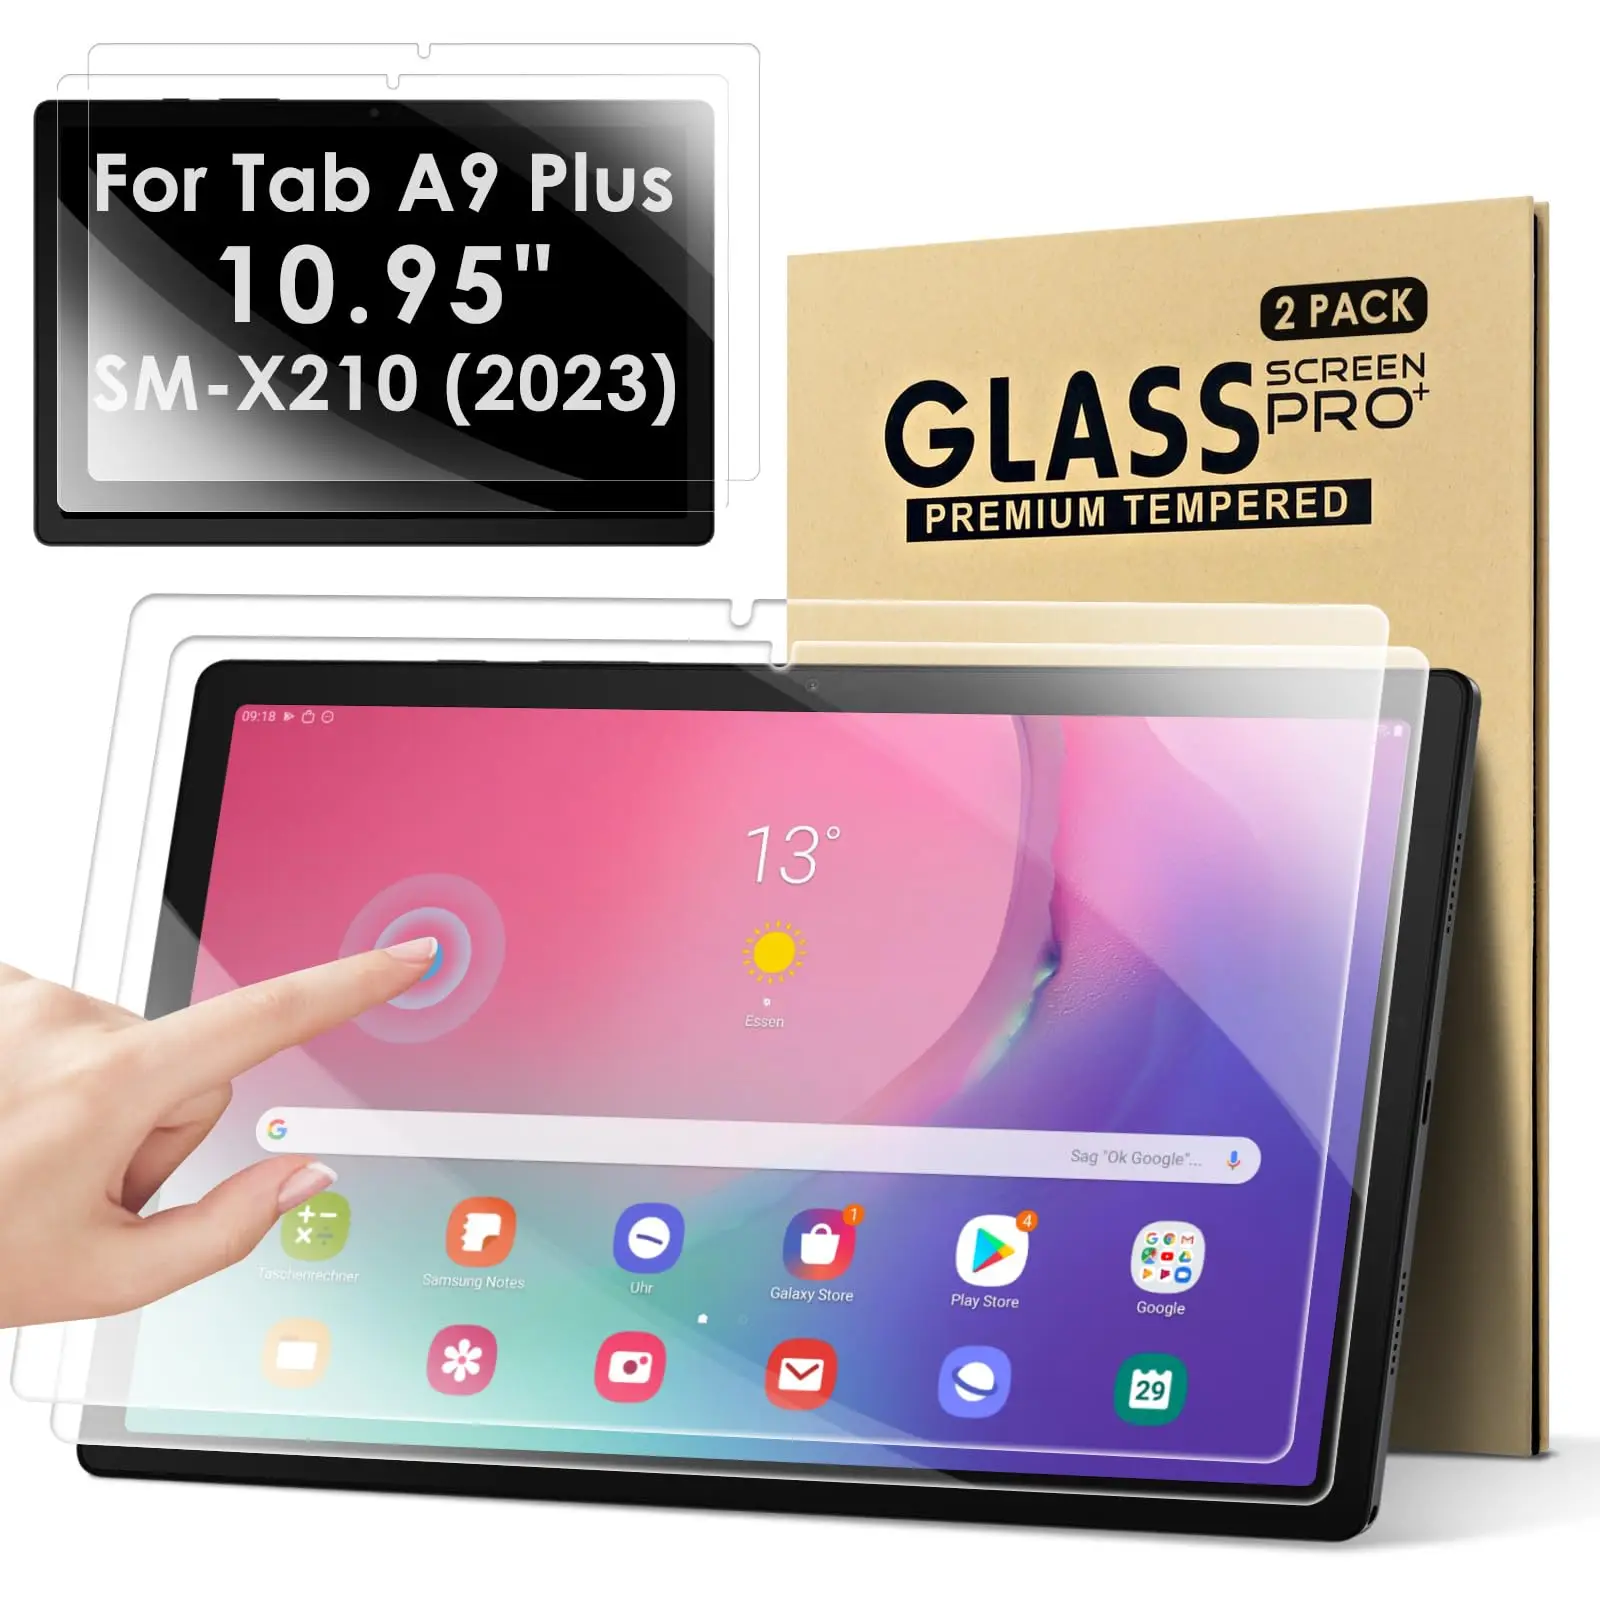 2 Pack) Tempered Glass For Samsung Galaxy Tab A9 Plus 11 2023 SM